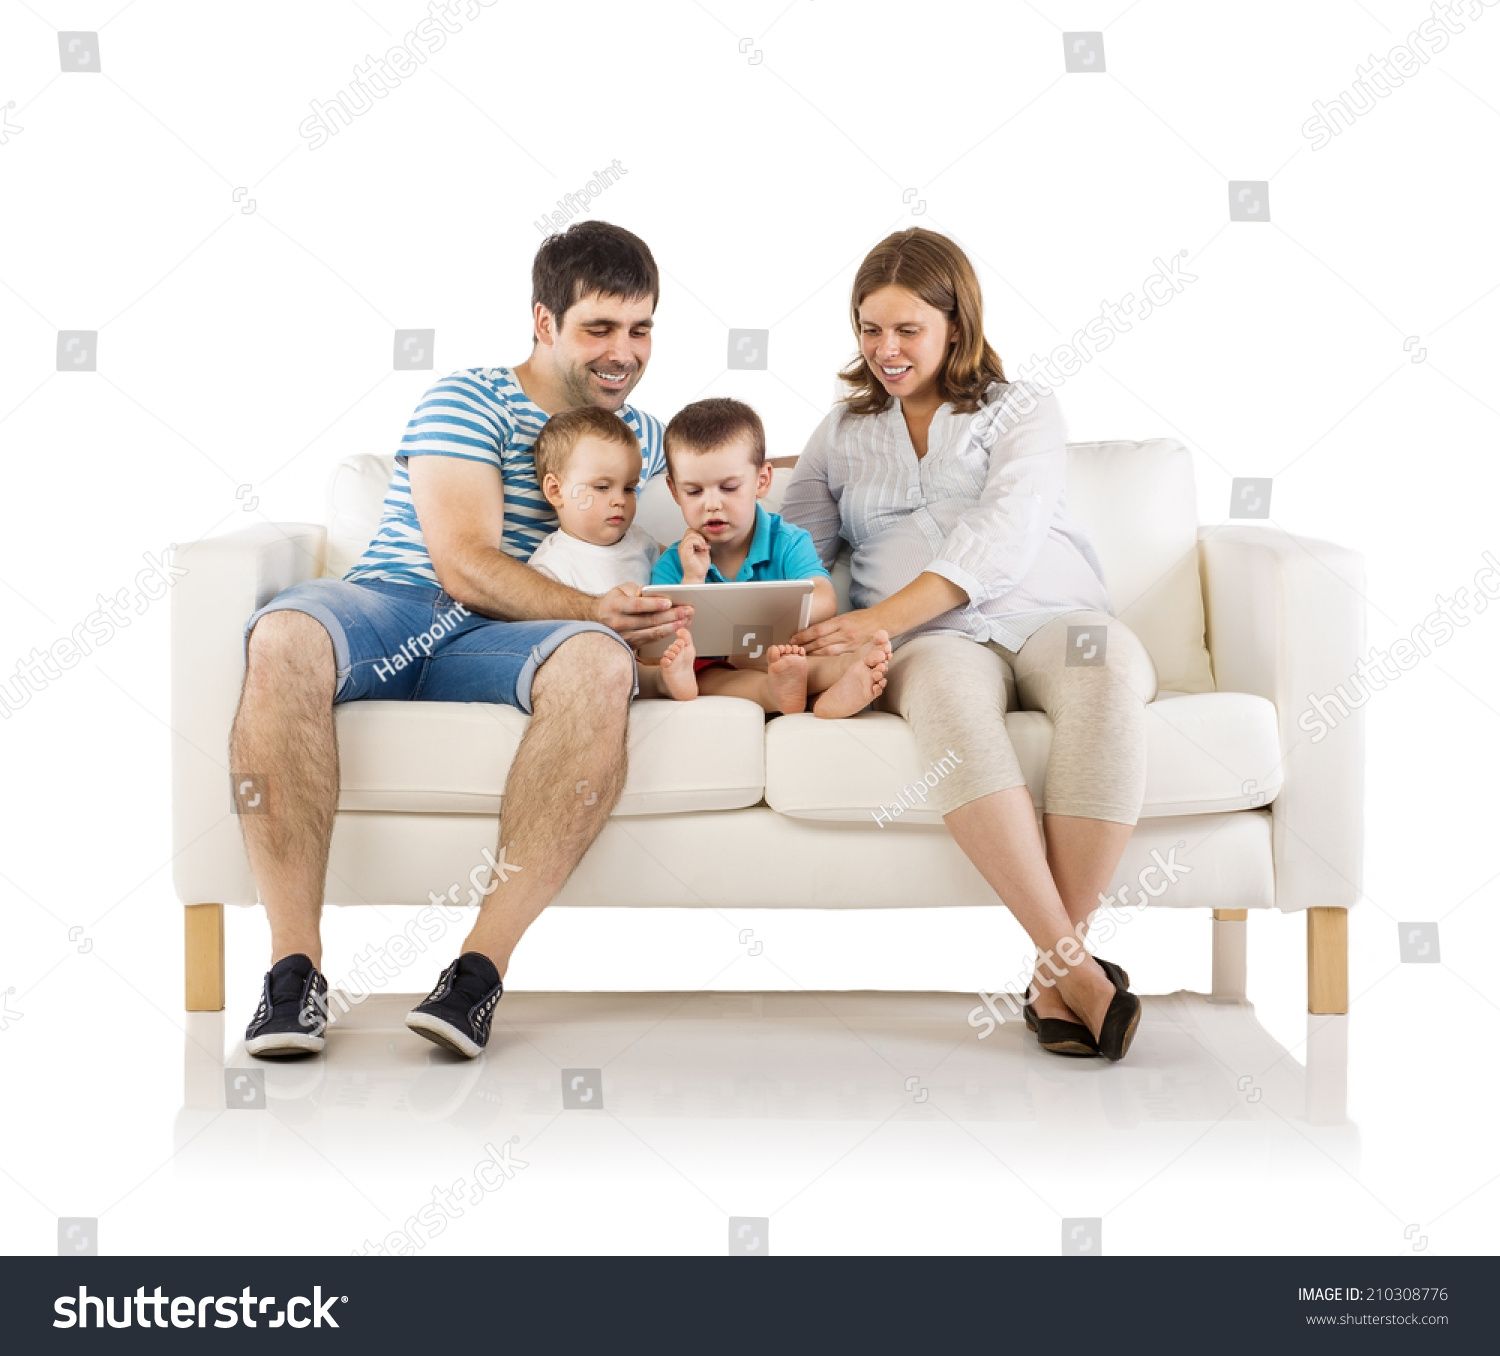 Portrait Happy Family Two Children Pregnant Stock Photo 210308776 Intended For Family Sofa (View 6 of 12)